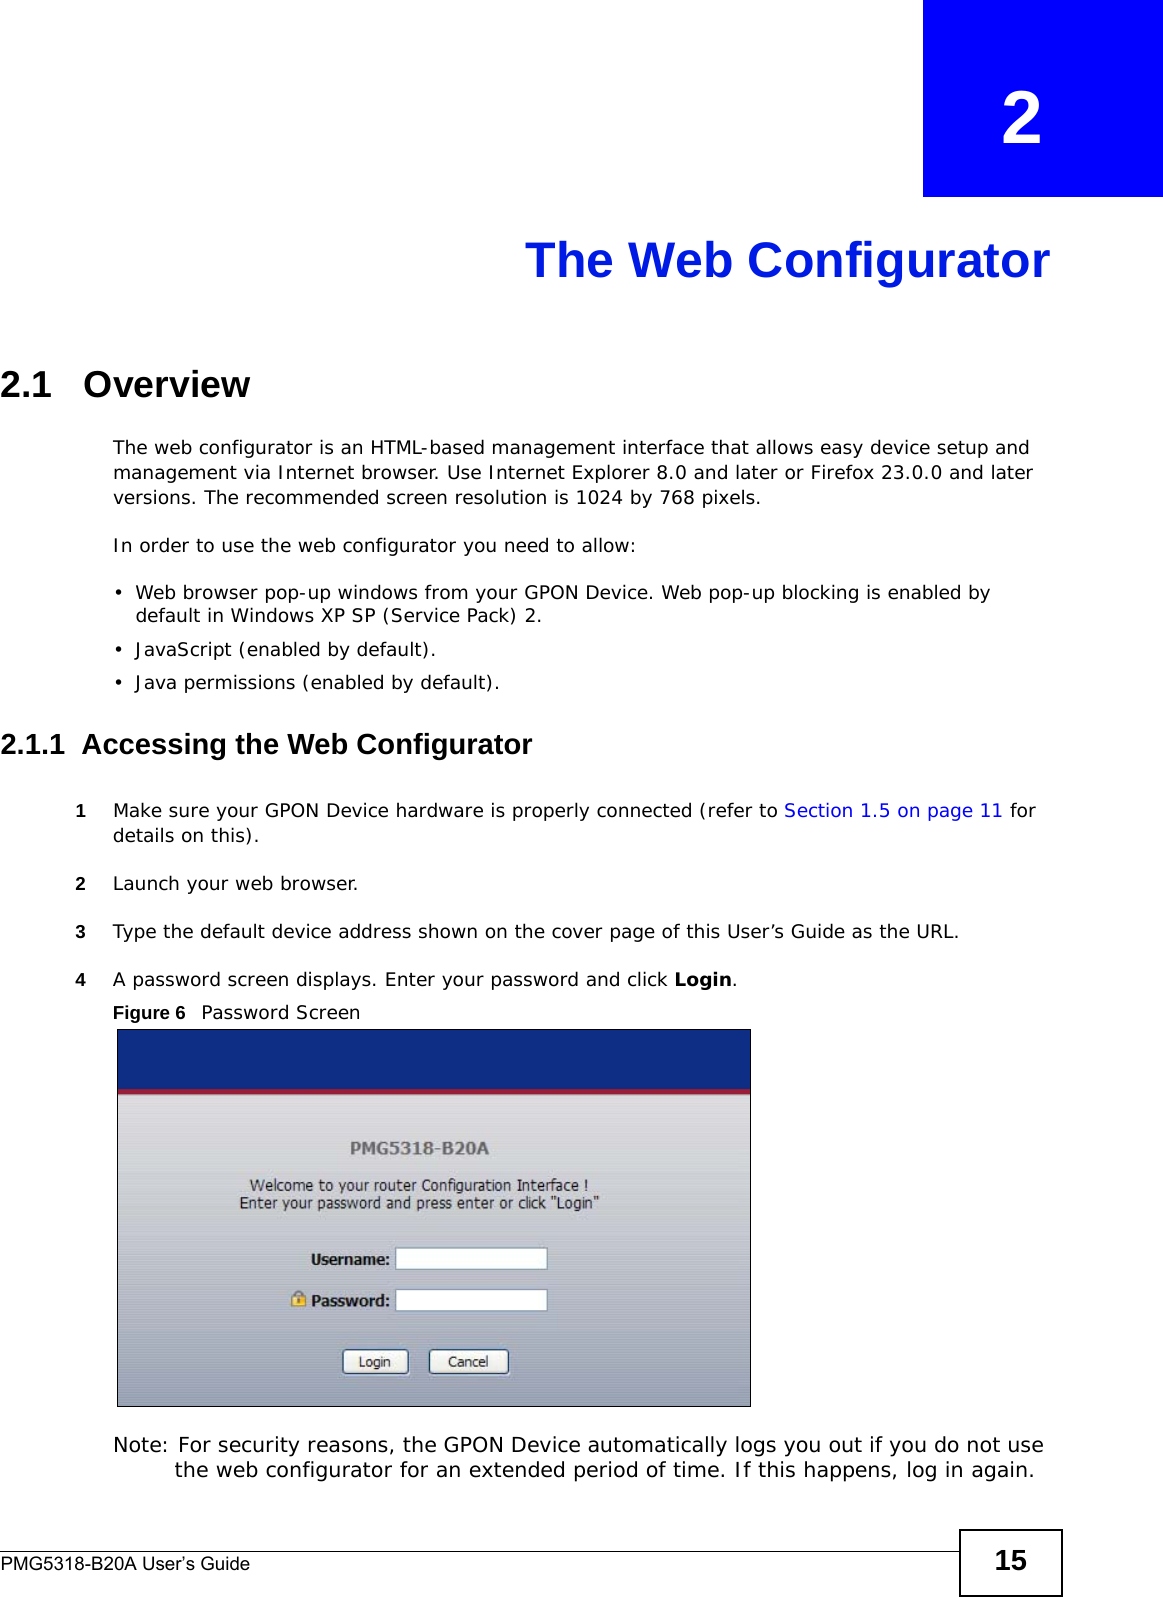 PMG5318-B20A User’s Guide 15CHAPTER   2The Web Configurator2.1   OverviewThe web configurator is an HTML-based management interface that allows easy device setup and management via Internet browser. Use Internet Explorer 8.0 and later or Firefox 23.0.0 and later versions. The recommended screen resolution is 1024 by 768 pixels.In order to use the web configurator you need to allow:• Web browser pop-up windows from your GPON Device. Web pop-up blocking is enabled by default in Windows XP SP (Service Pack) 2.• JavaScript (enabled by default).• Java permissions (enabled by default).2.1.1  Accessing the Web Configurator1Make sure your GPON Device hardware is properly connected (refer to Section 1.5 on page 11 for details on this).2Launch your web browser.3Type the default device address shown on the cover page of this User’s Guide as the URL.4A password screen displays. Enter your password and click Login. Figure 6   Password ScreenNote: For security reasons, the GPON Device automatically logs you out if you do not use the web configurator for an extended period of time. If this happens, log in again. 